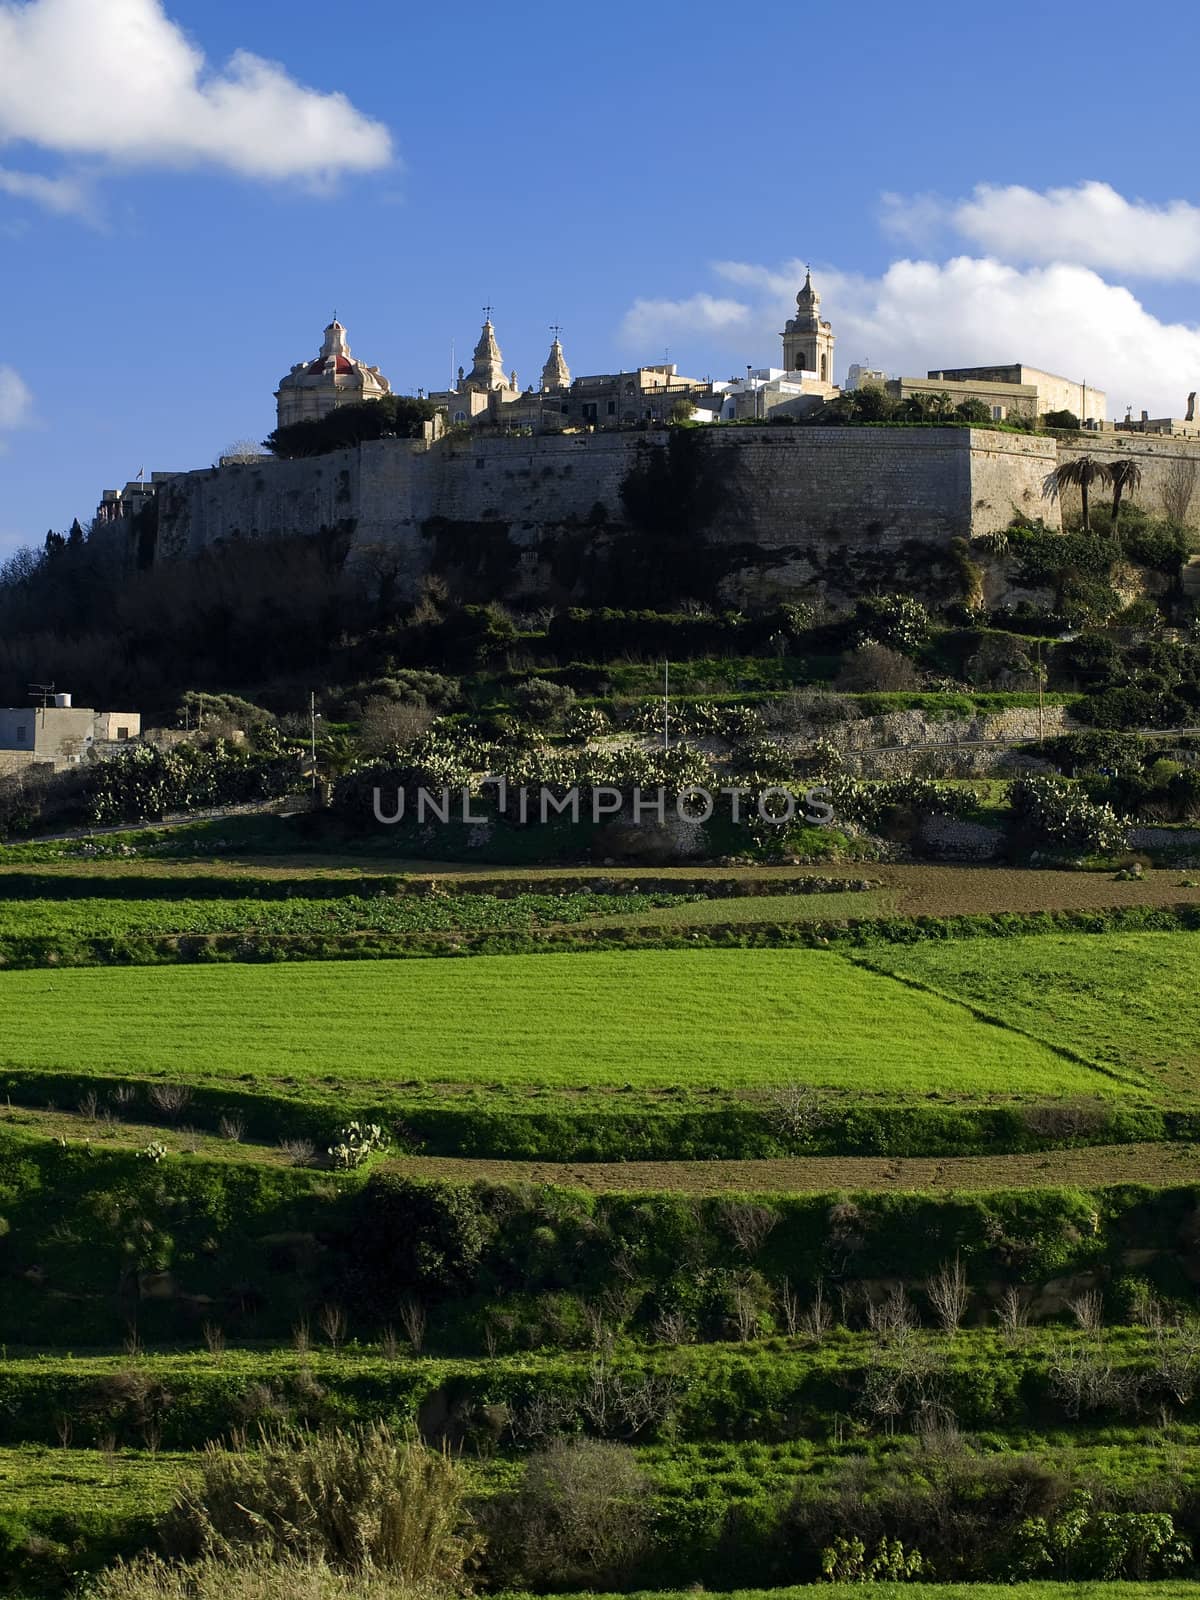 The dome of the medieval cathedral overlooking the bastions of the old city of Malta, Mdina.